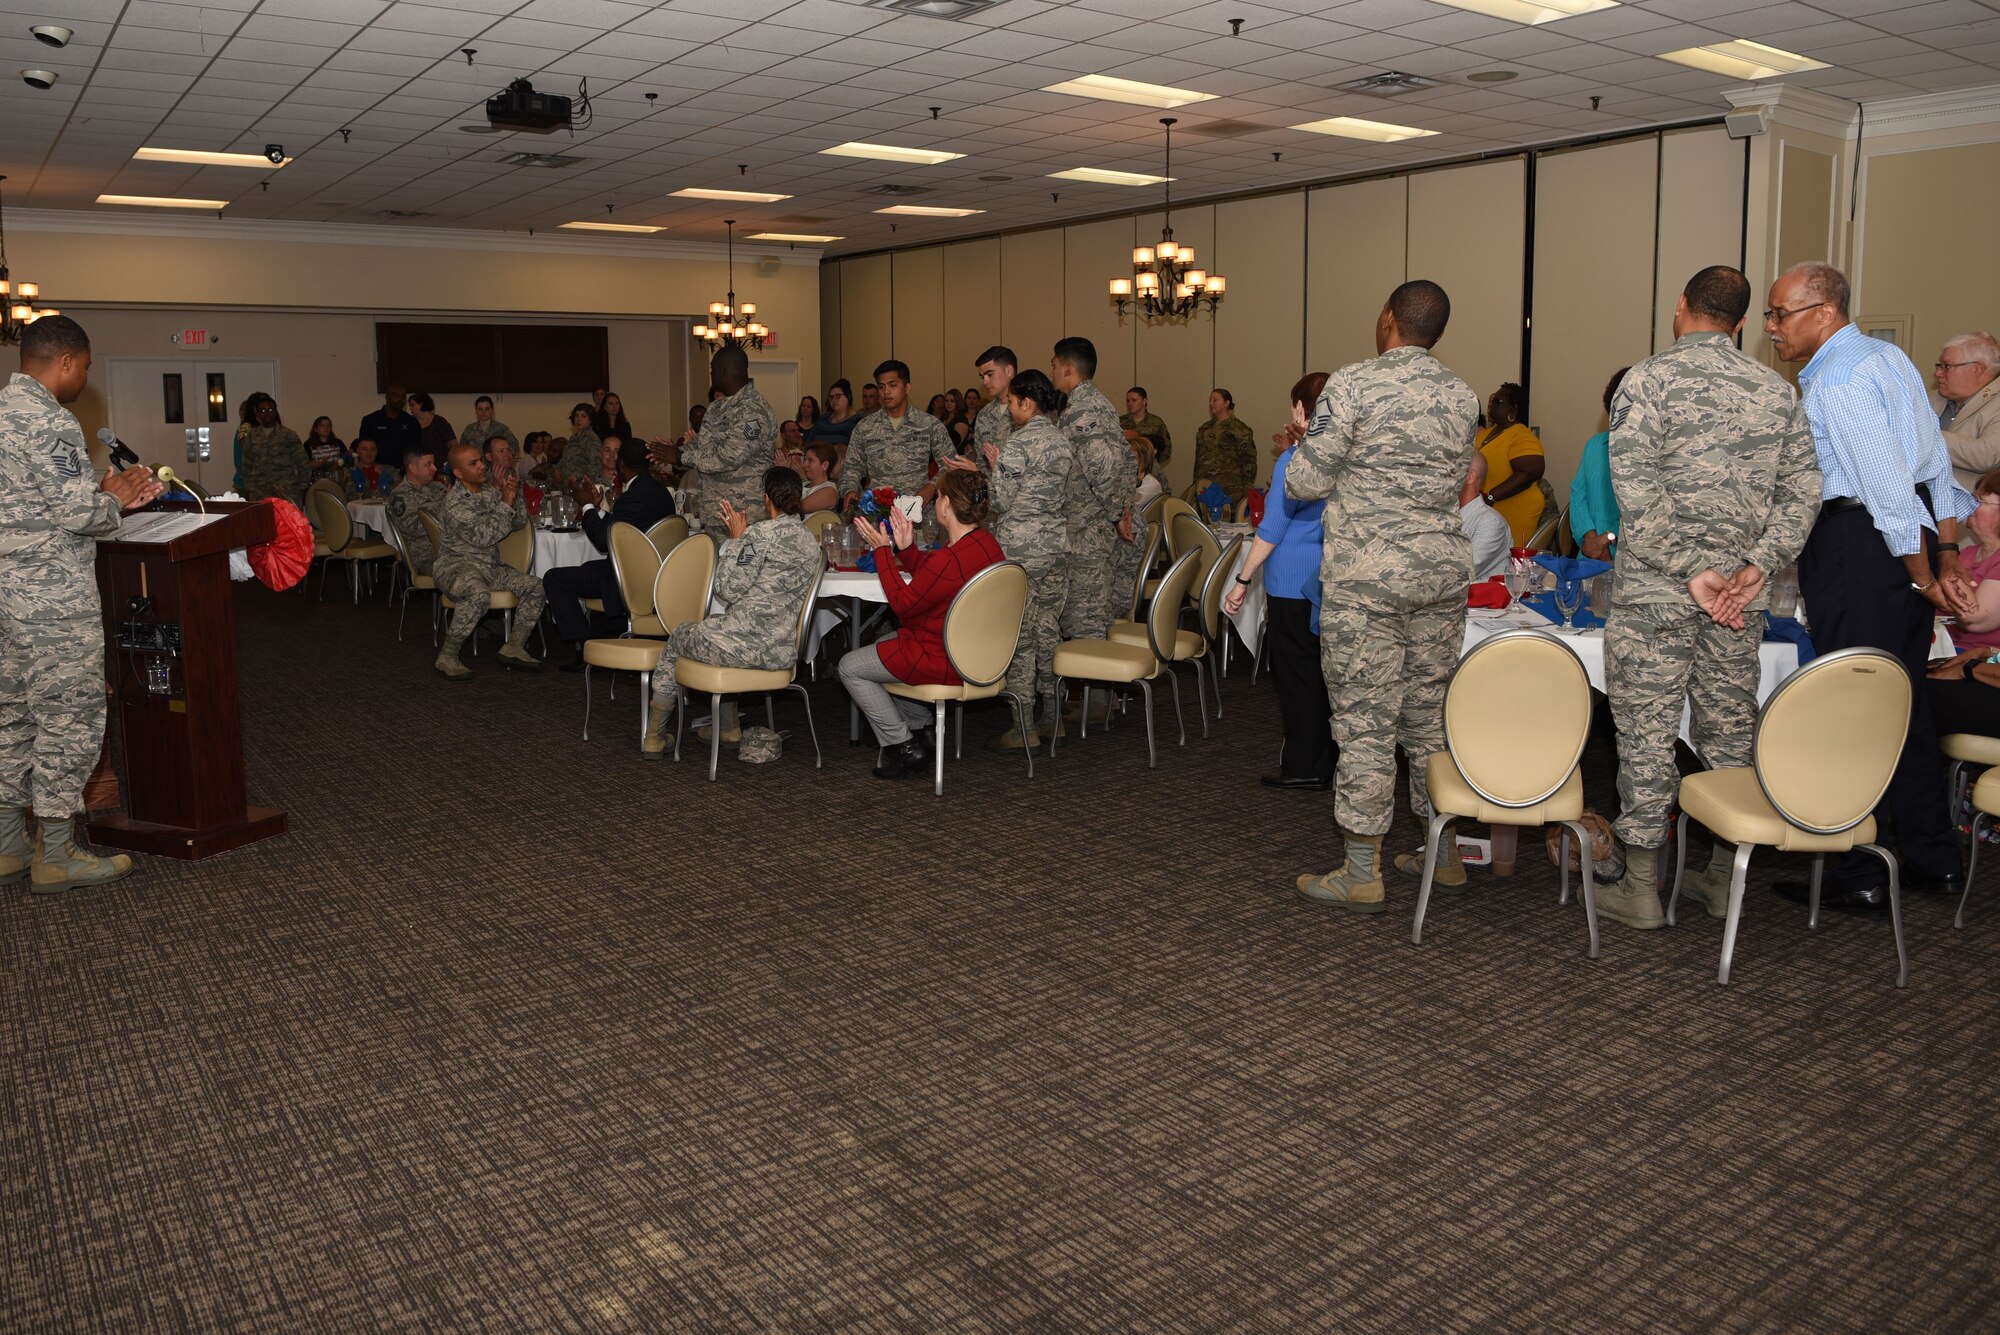 Volunteers stand to be recognized during an annual volunteer recognition ceremony at Shaw Air Force Base, S.C., April 19, 2018.